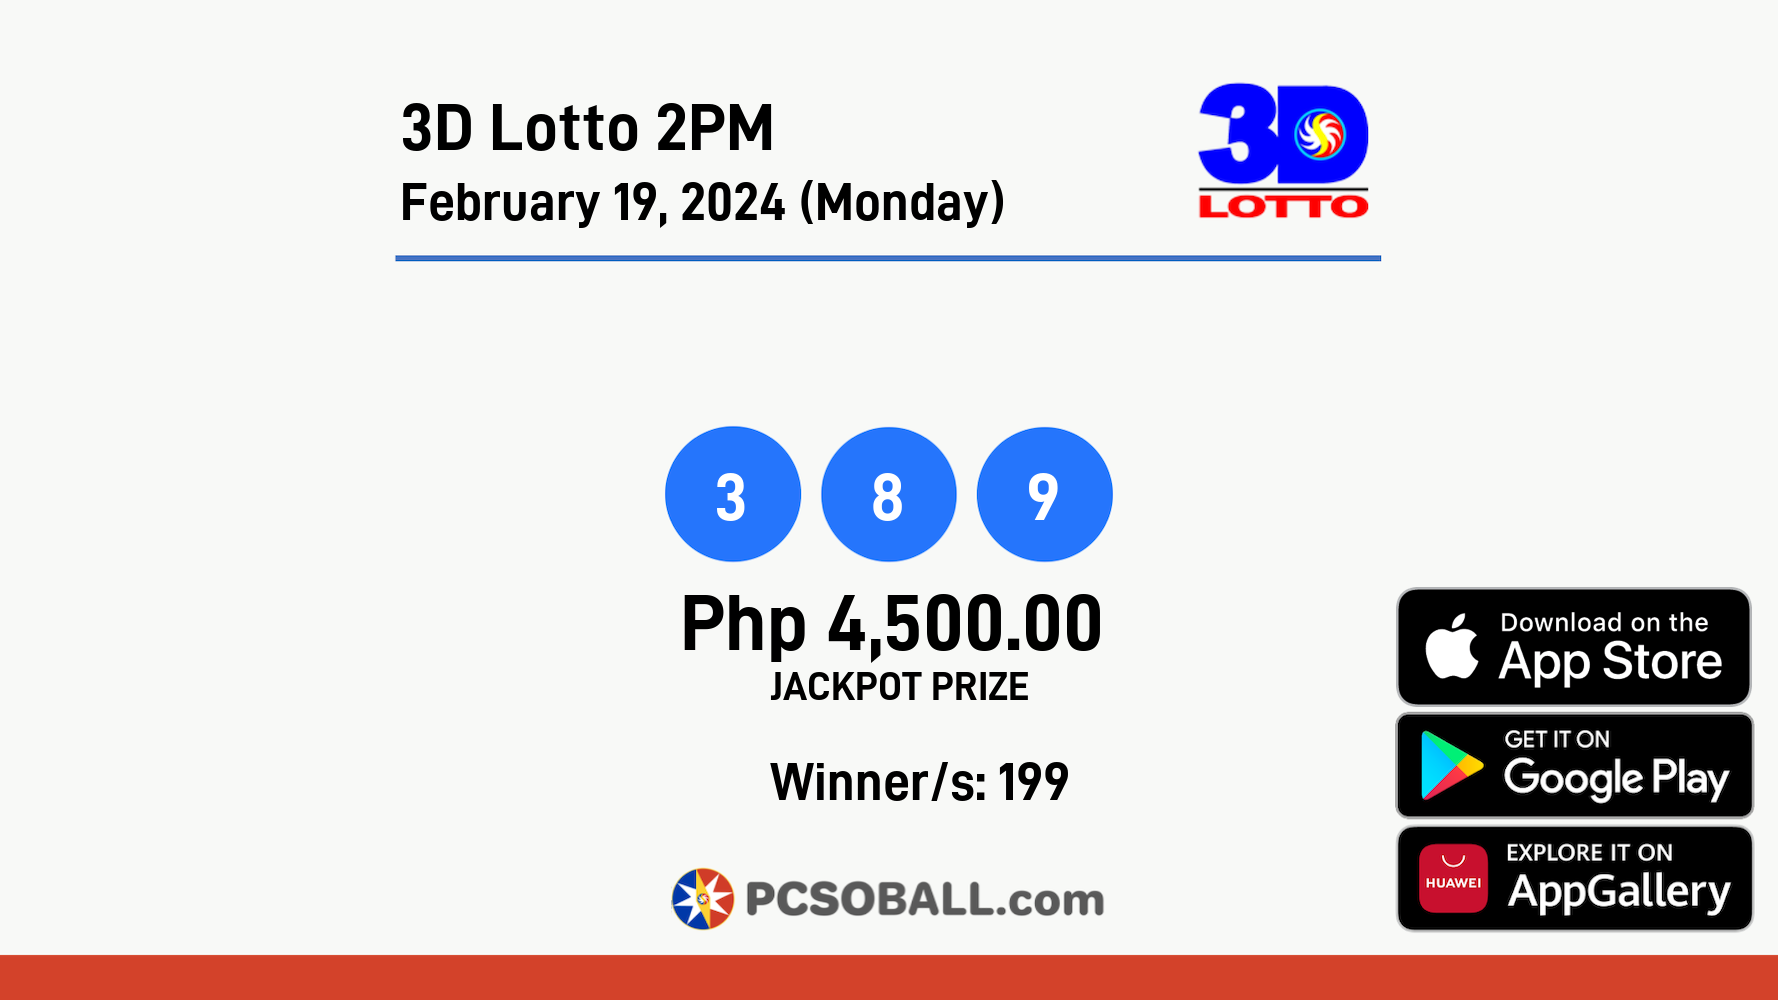 3D Lotto 2PM February 19, 2024 (Monday) Result